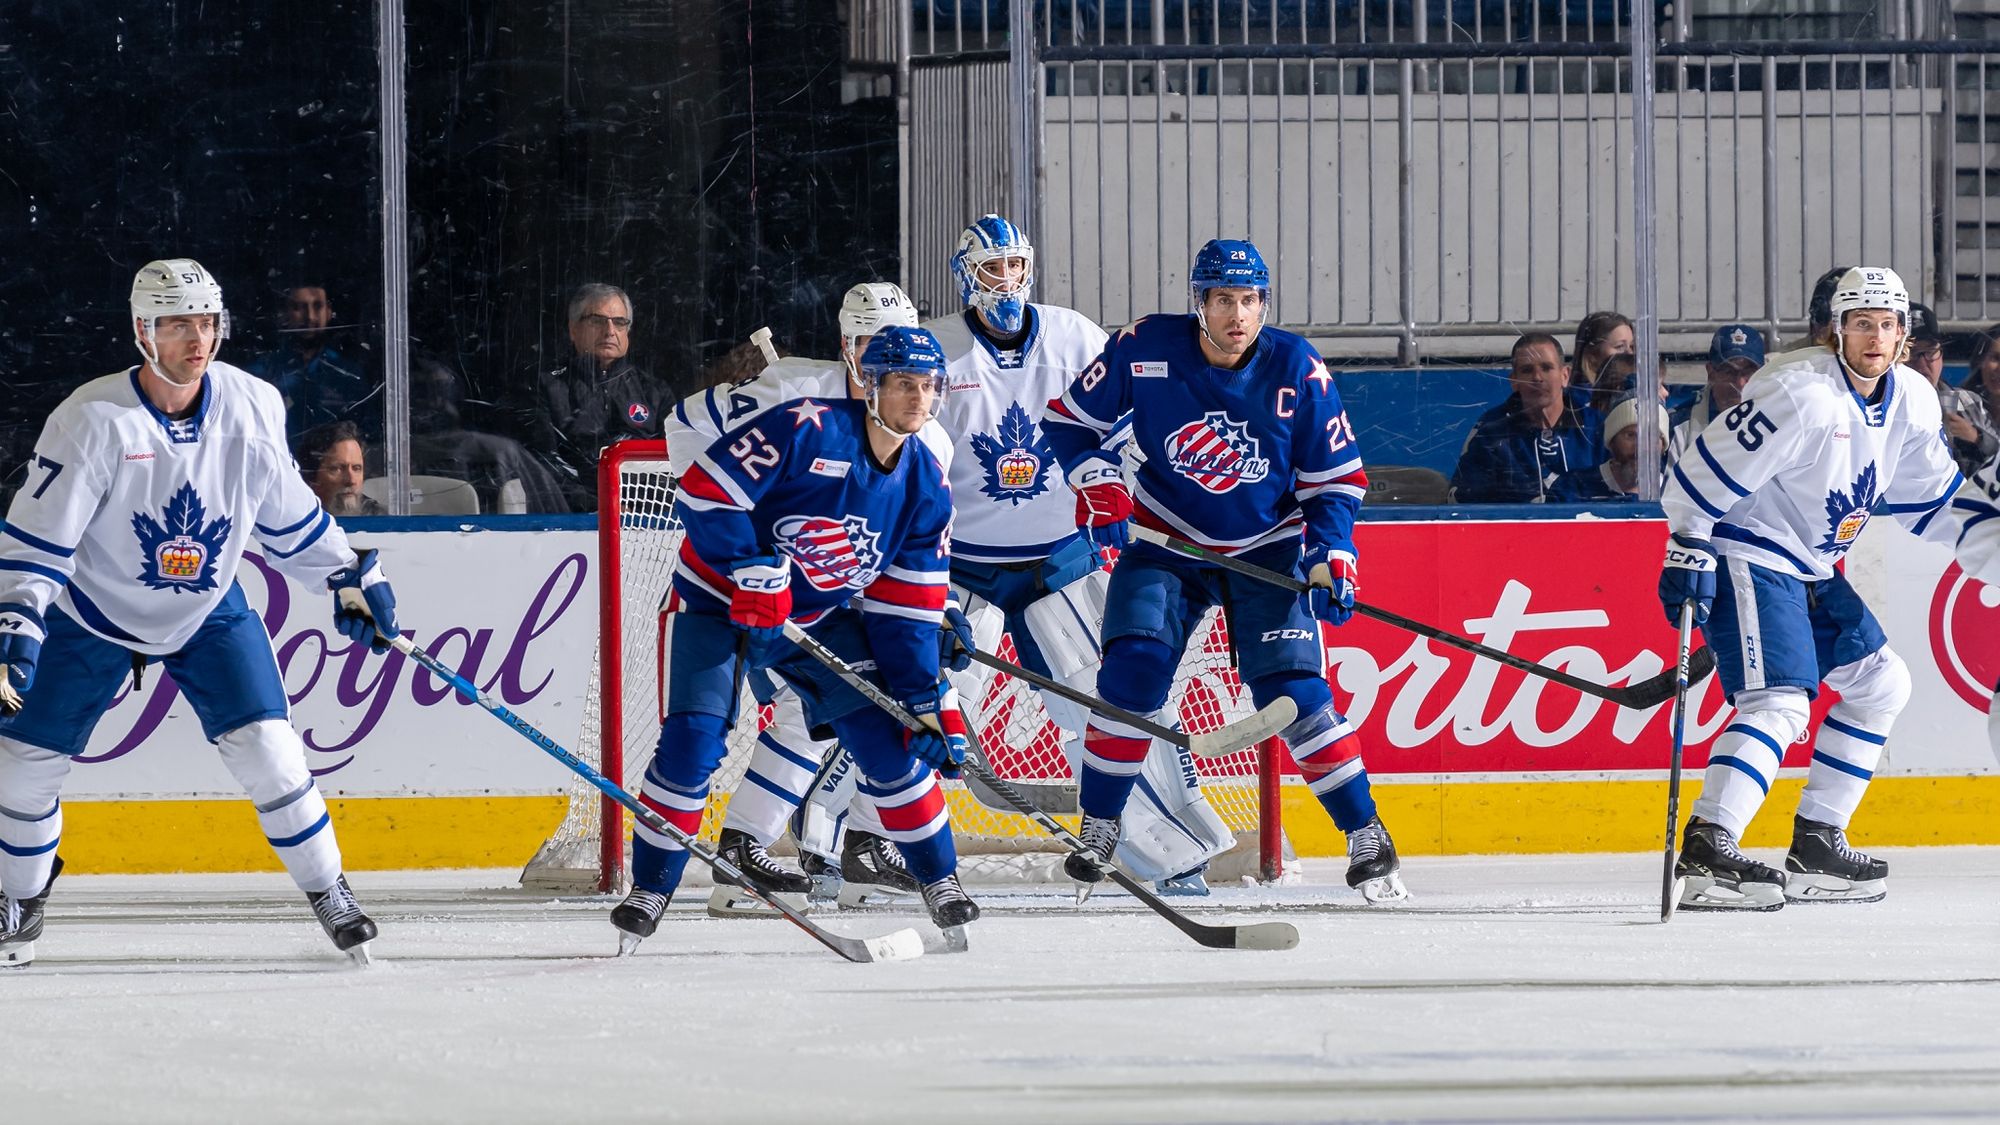 COMETS PULL AWAY FROM AMERKS IN THIRD PERIOD TO TAKE GAME 1